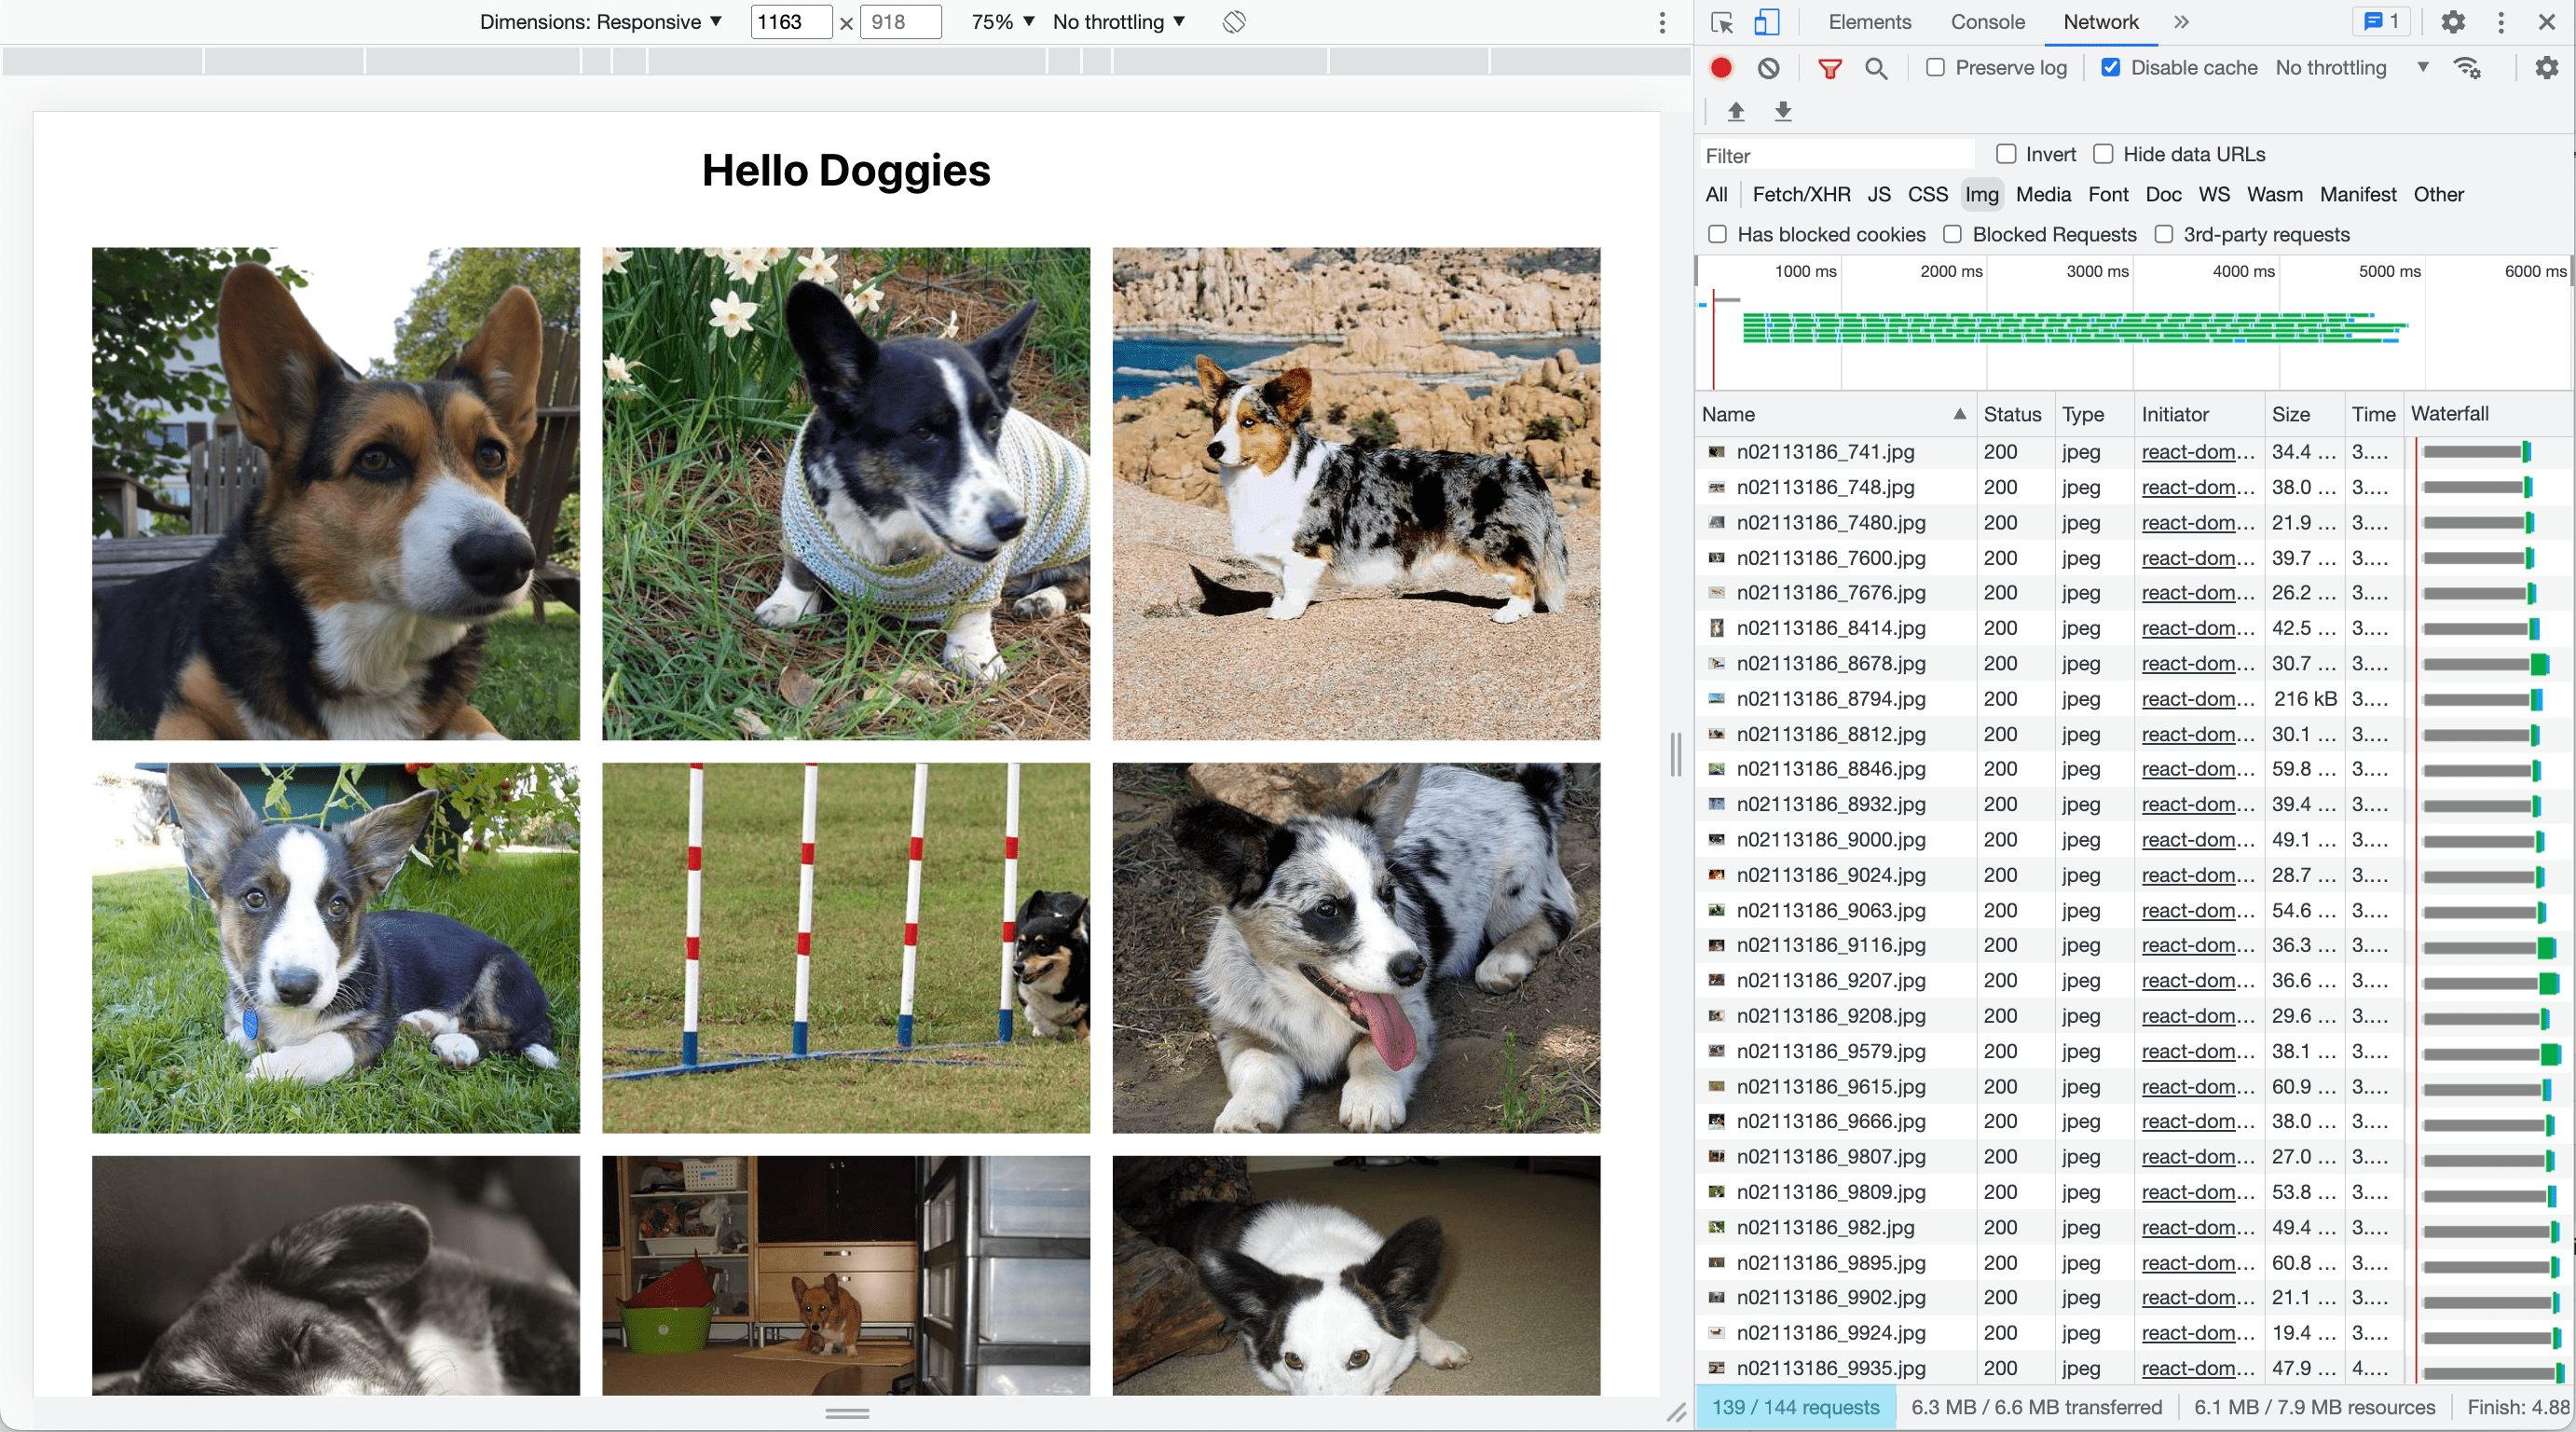 Browser with network tab open, showing that all images have loaded